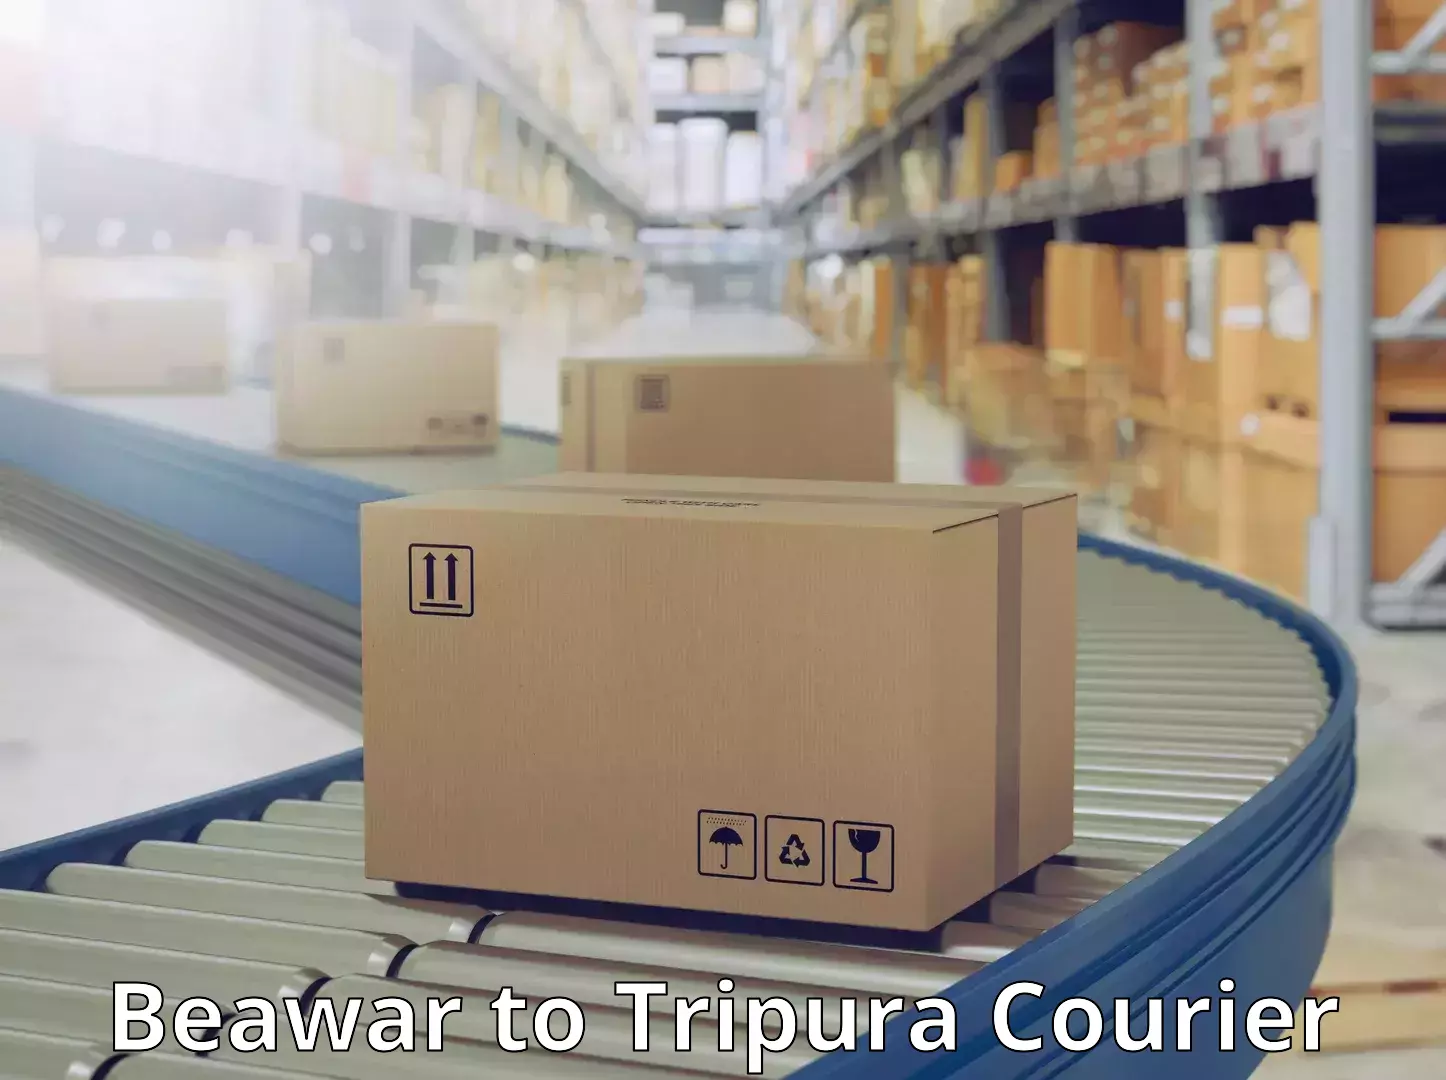 State-of-the-art courier technology Beawar to Ambassa